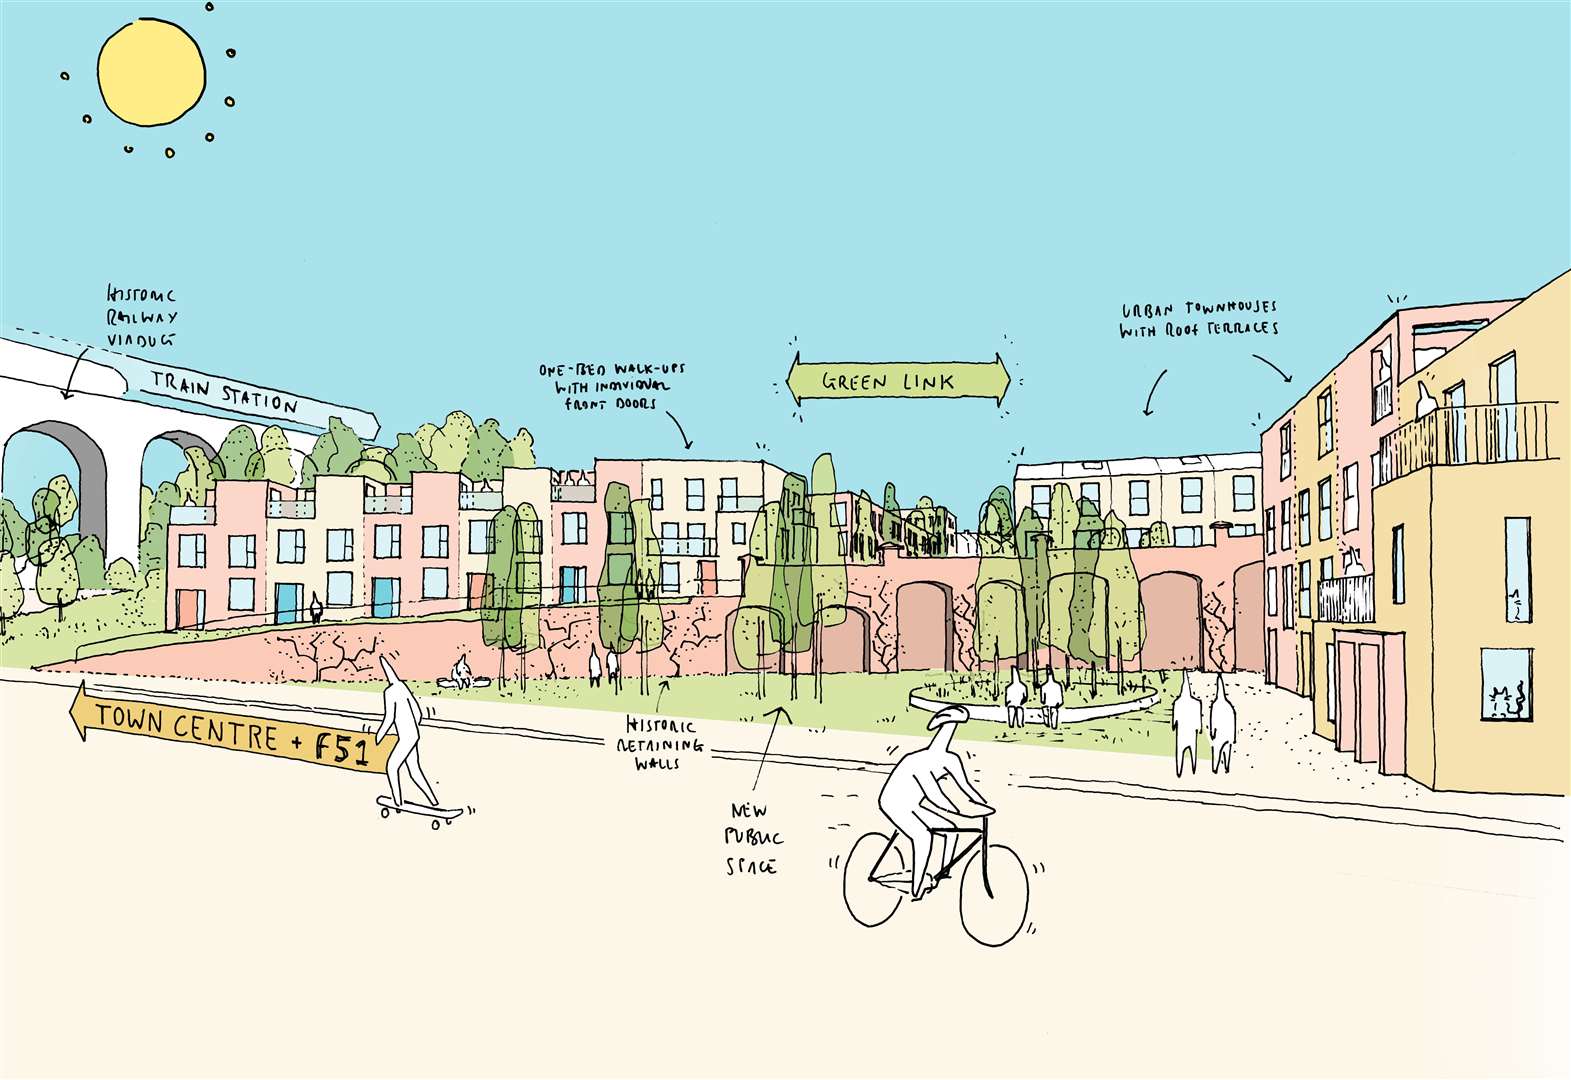 A sketch released by the council shows how the land might look